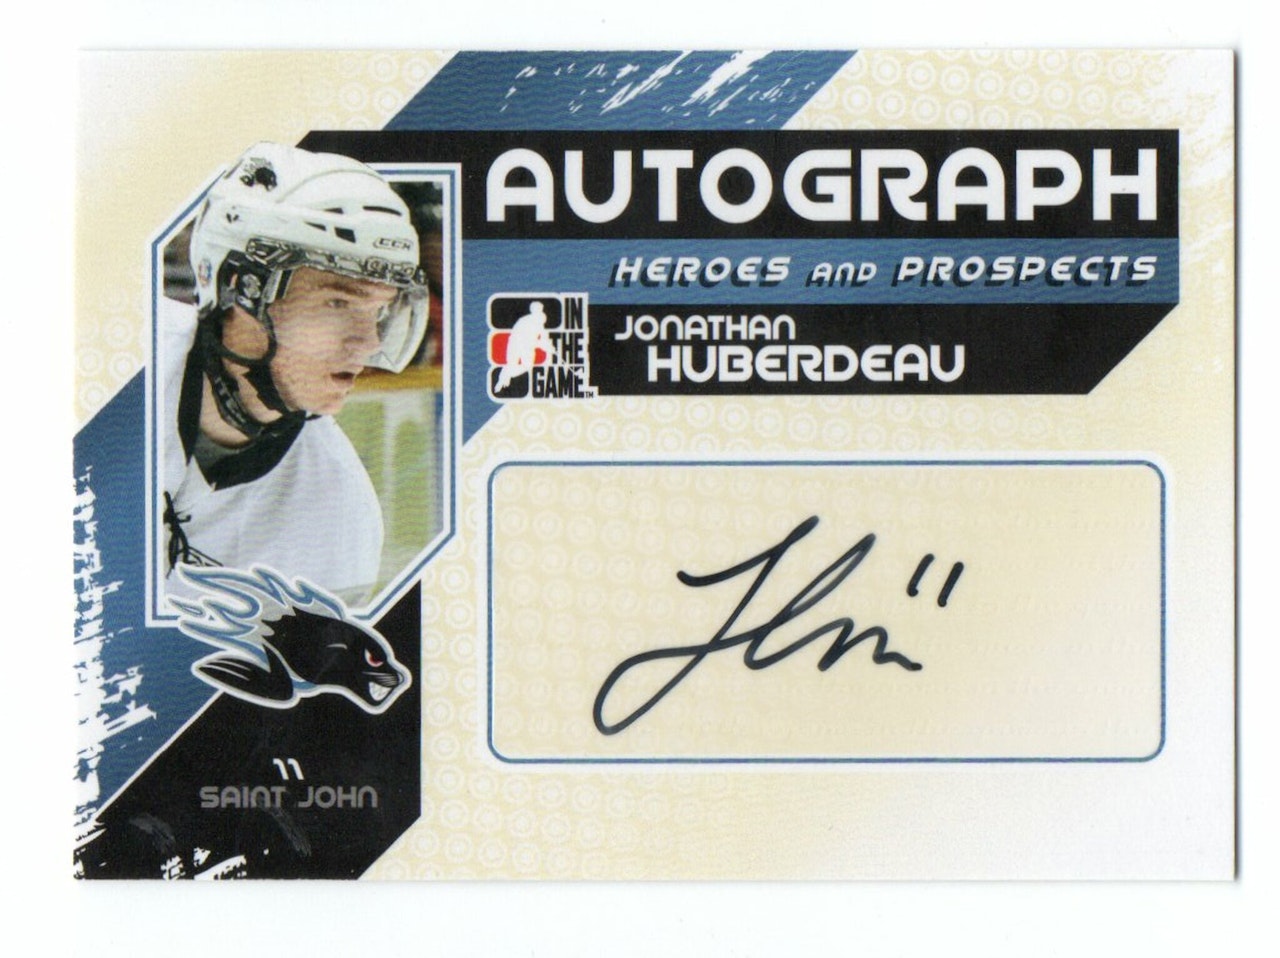 2010-11 ITG Heroes and Prospects Autographs #AJH Jonathan Huberdeau (150-190x9-NHLPANTHERS)